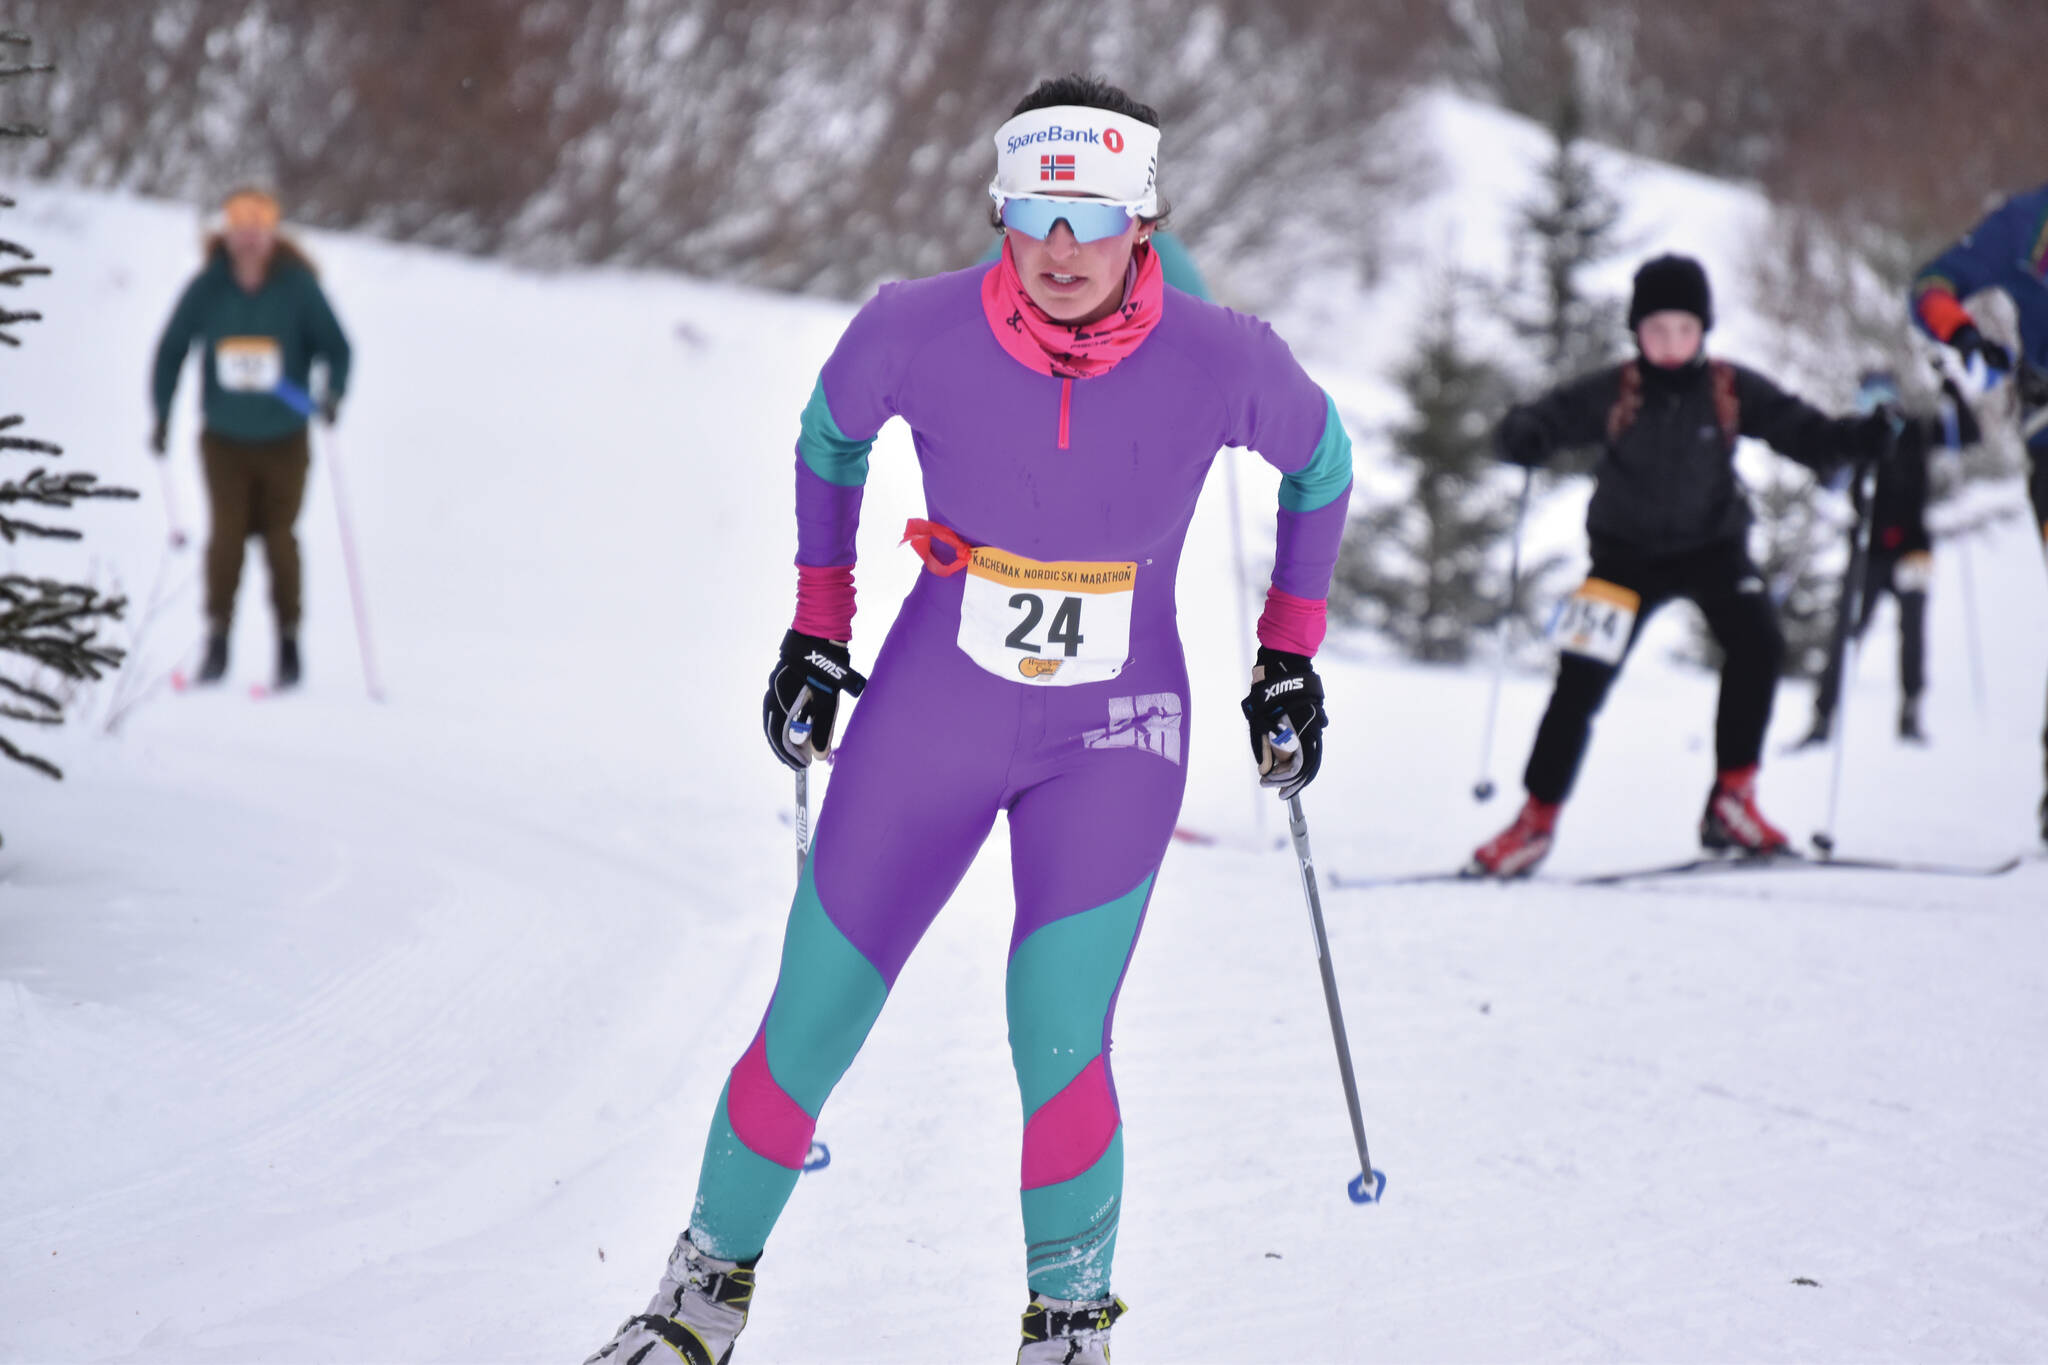 Anchorage’s Jenna DiFolco skis to victory in the 42-kilometer women’s race at the Kachemak Nordic Ski Marathon outside of Homer, Alaska, on Saturday, March 18, 2023. (Photo by Erin Thompson/Peninsula Clarion)